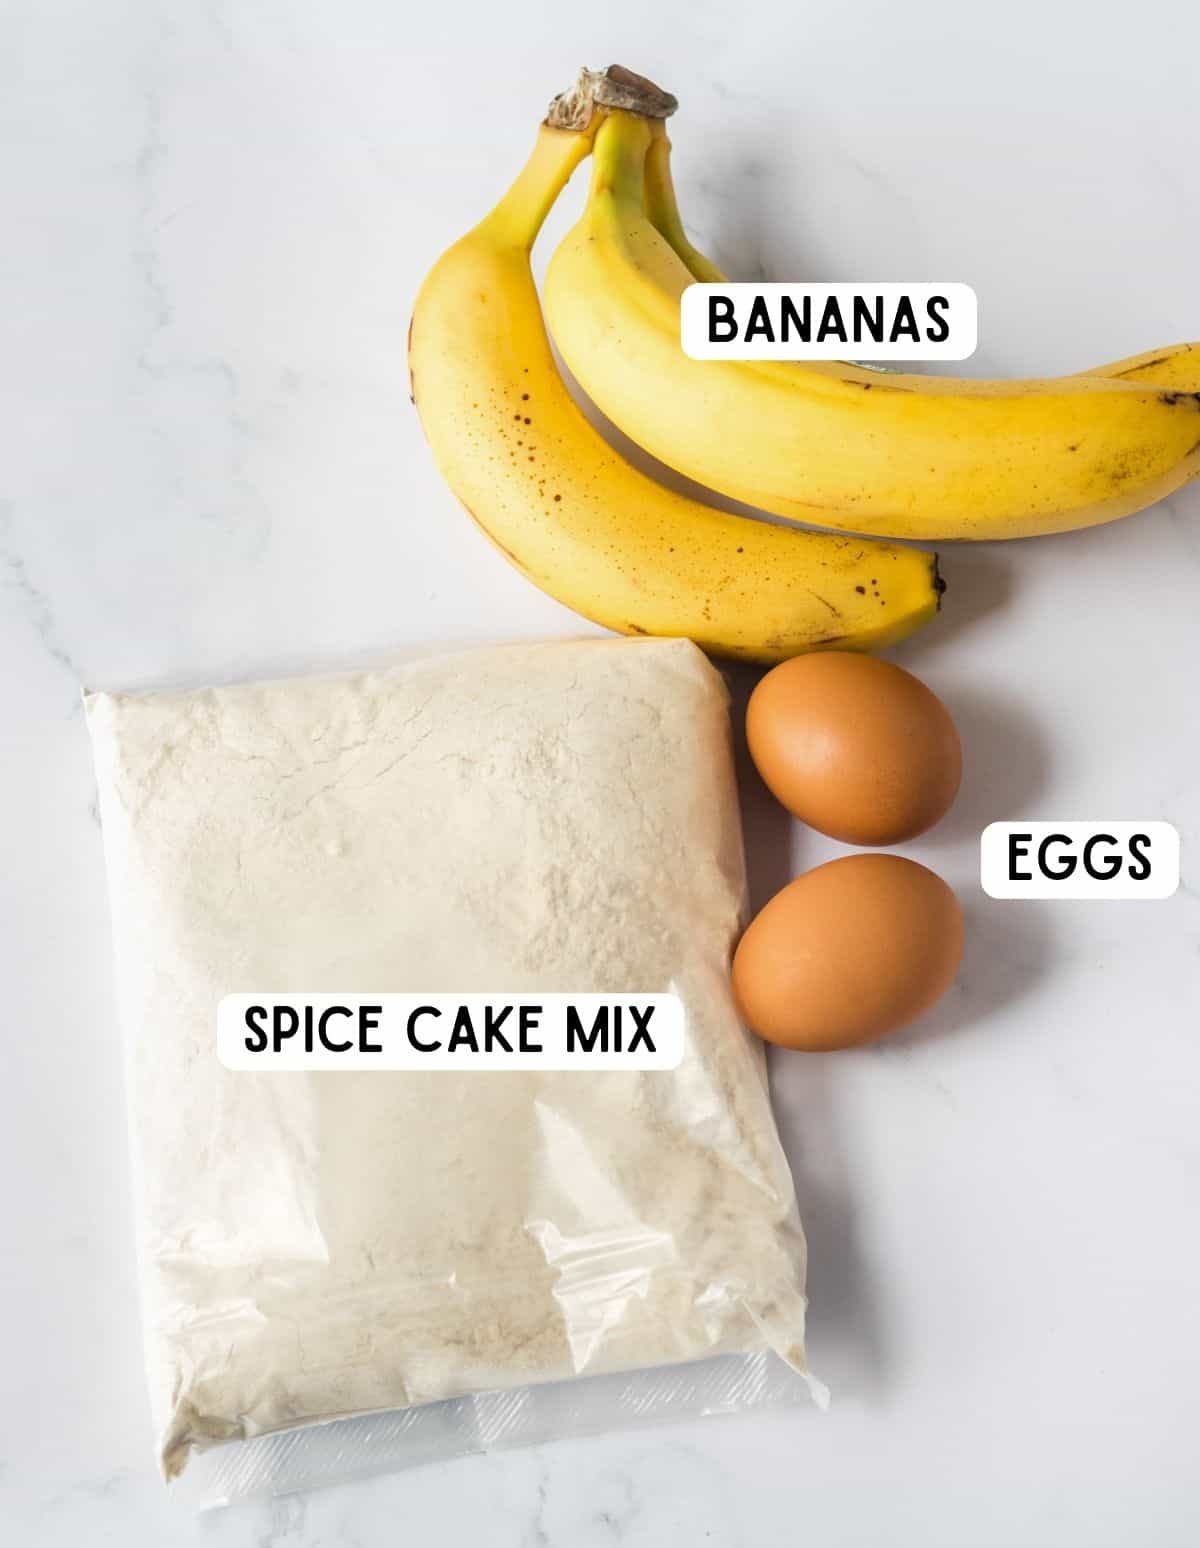 Banana bread ingredients: spice cake mix, 3 ripe bananas, and 2 eggs.